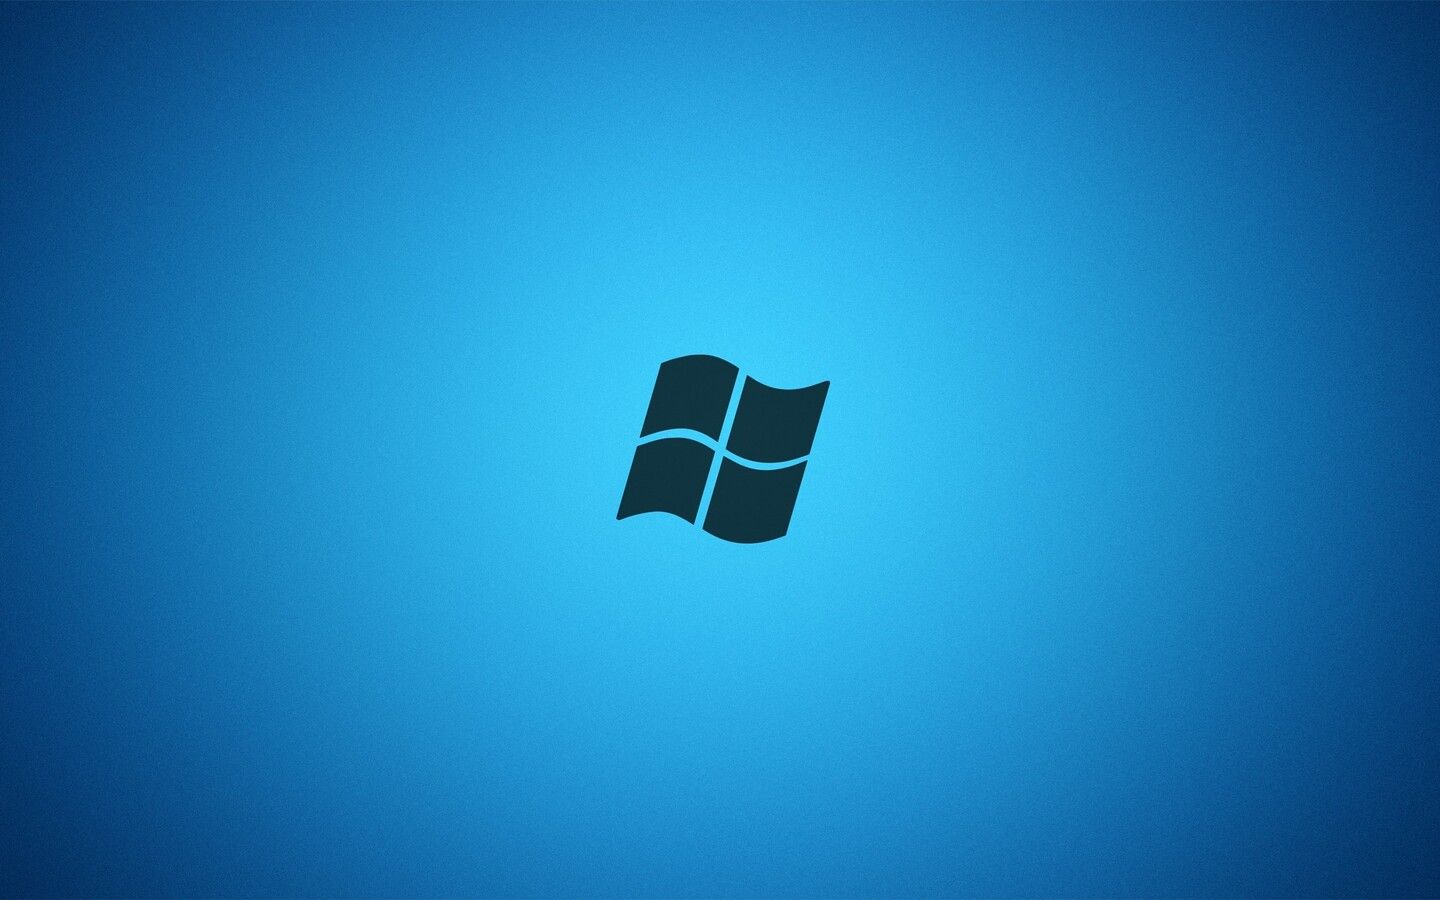 Android Logo Windows 7 HD Wallpapers - Wallpaper Cave